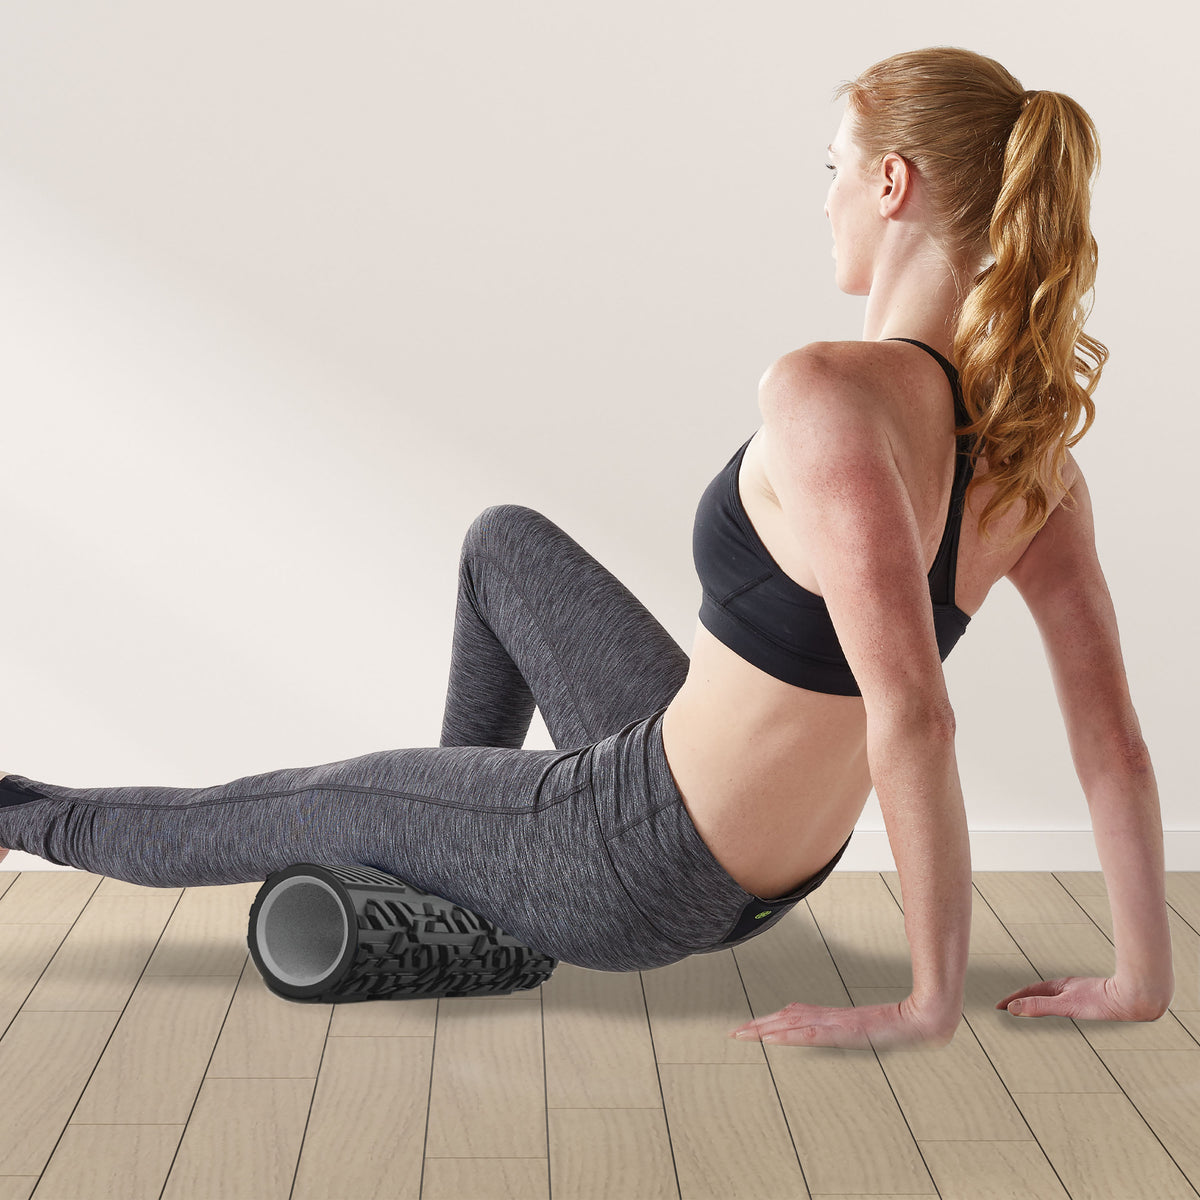 Restore Deep Tissue Performance Roller under the upper leg as it is extended to massage